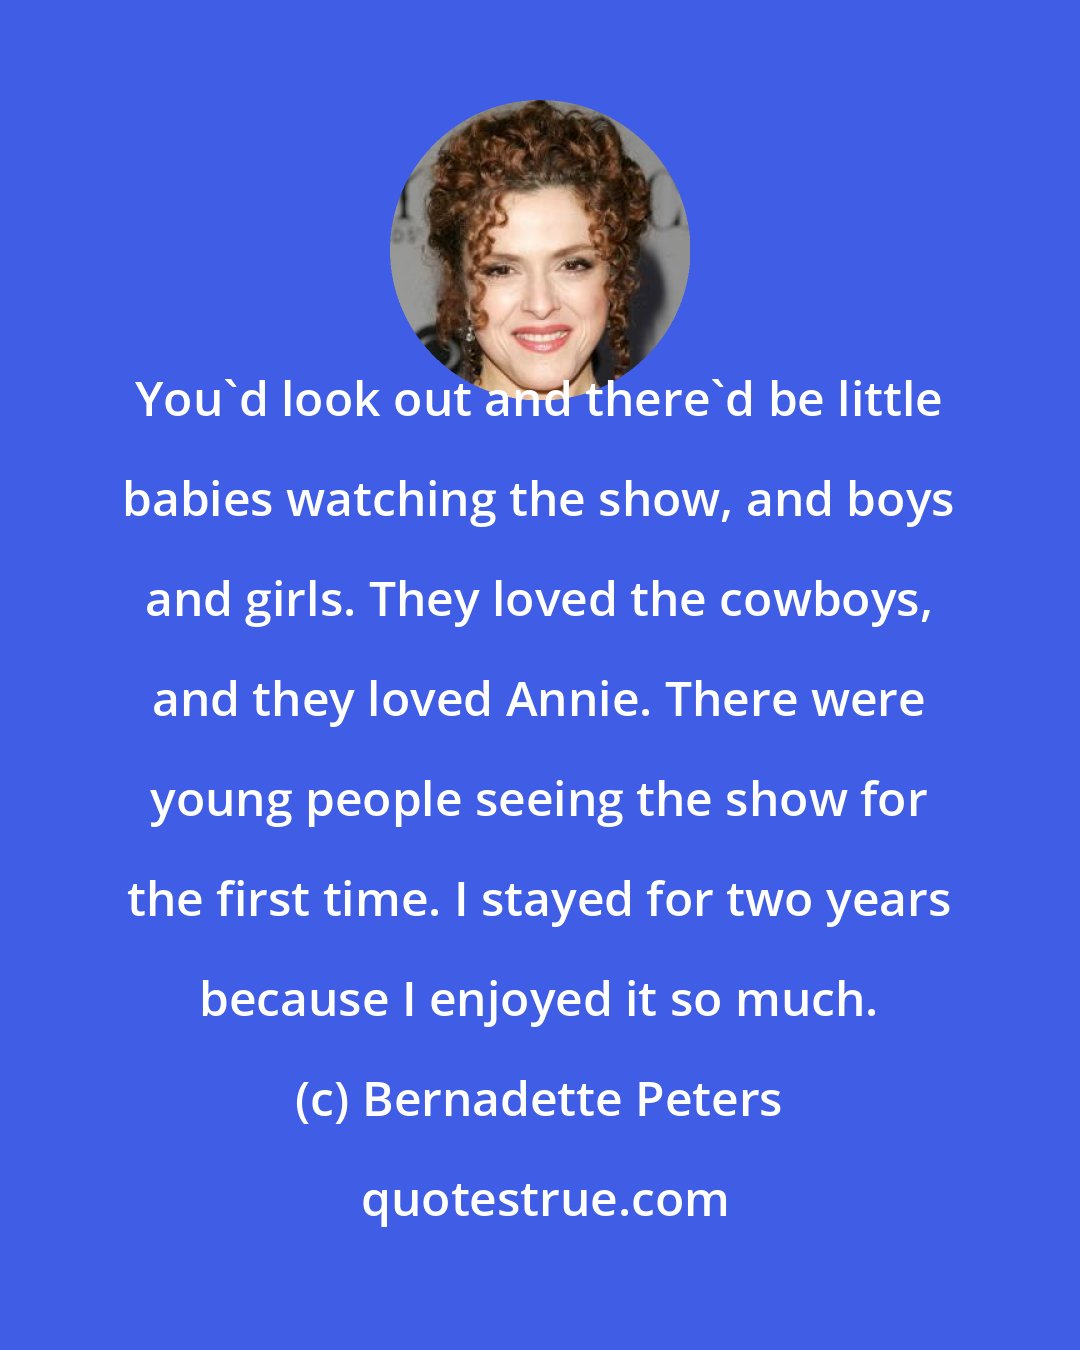 Bernadette Peters: You'd look out and there'd be little babies watching the show, and boys and girls. They loved the cowboys, and they loved Annie. There were young people seeing the show for the first time. I stayed for two years because I enjoyed it so much.